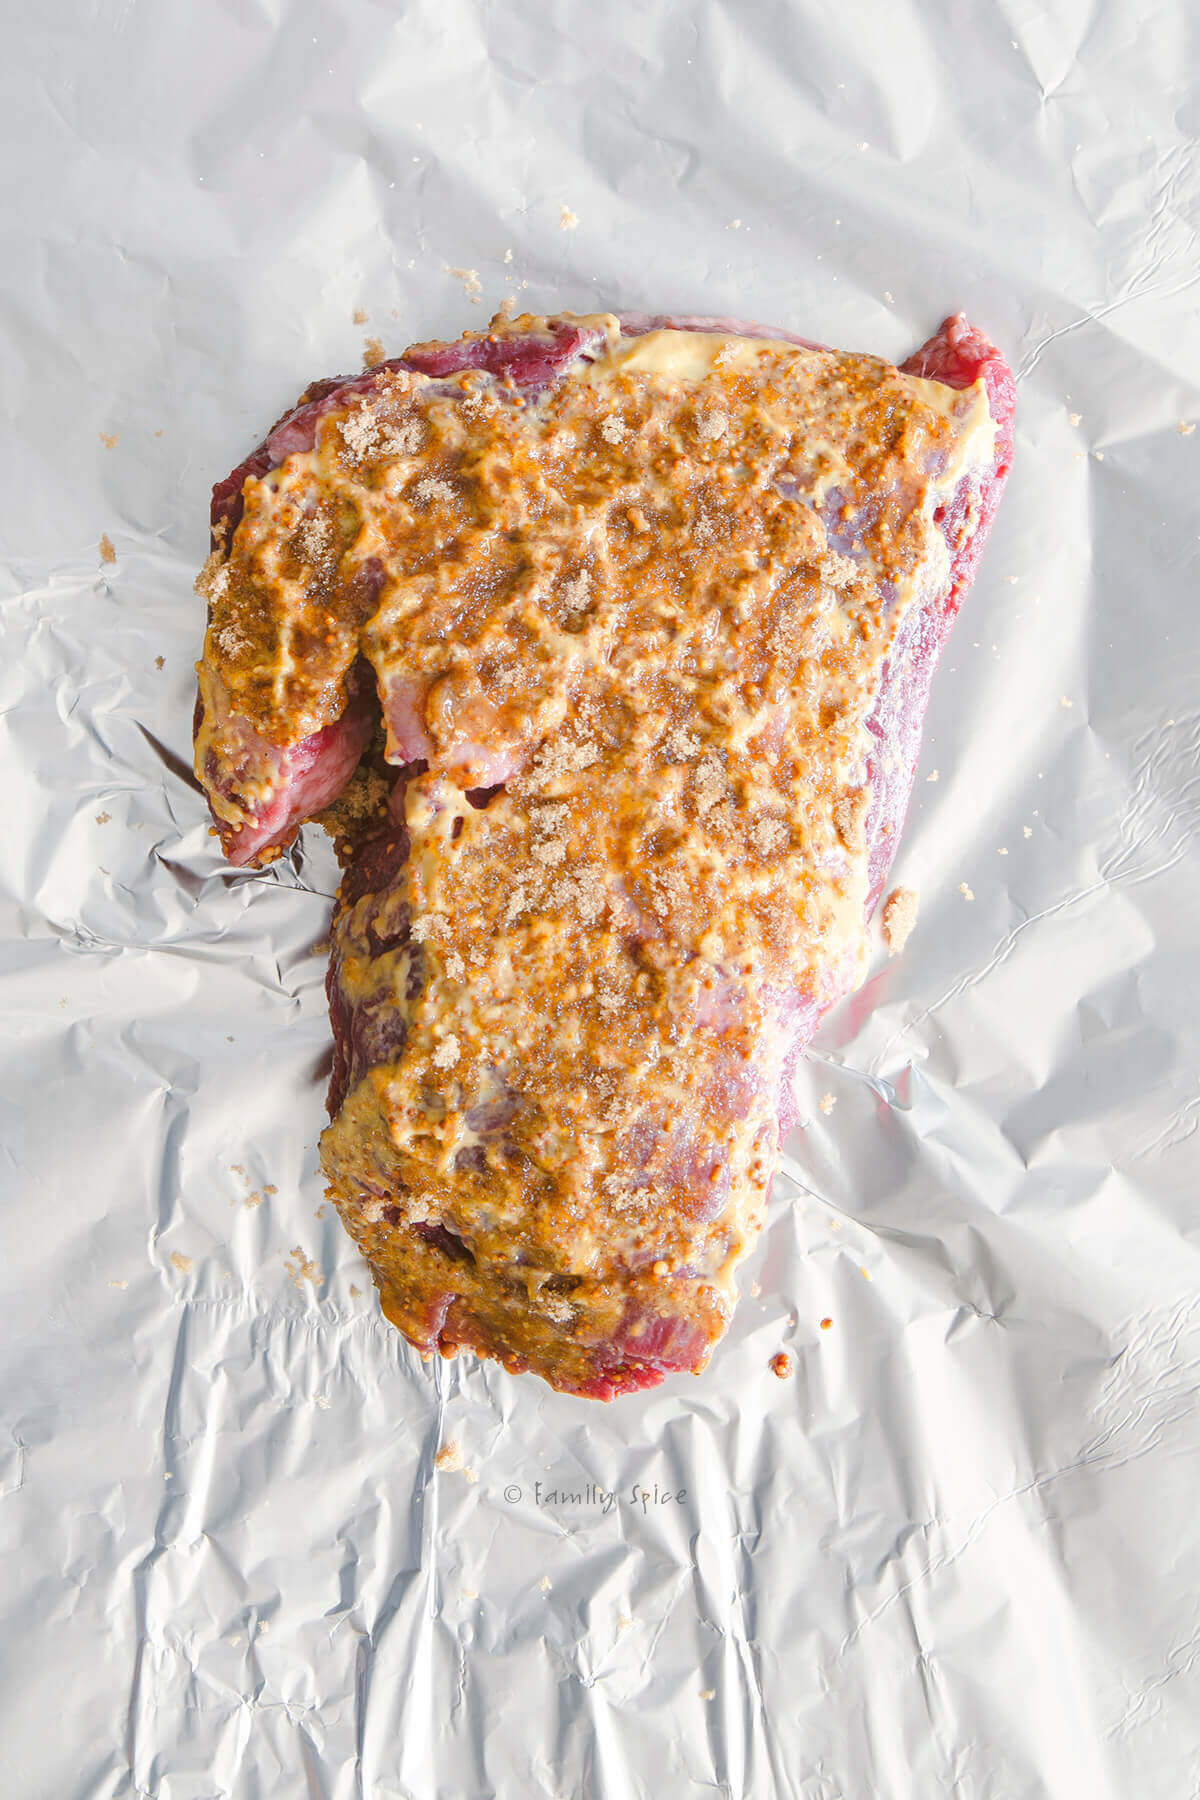 Corned beef brisket covered in mustard and brown sugar on a sheet of foil